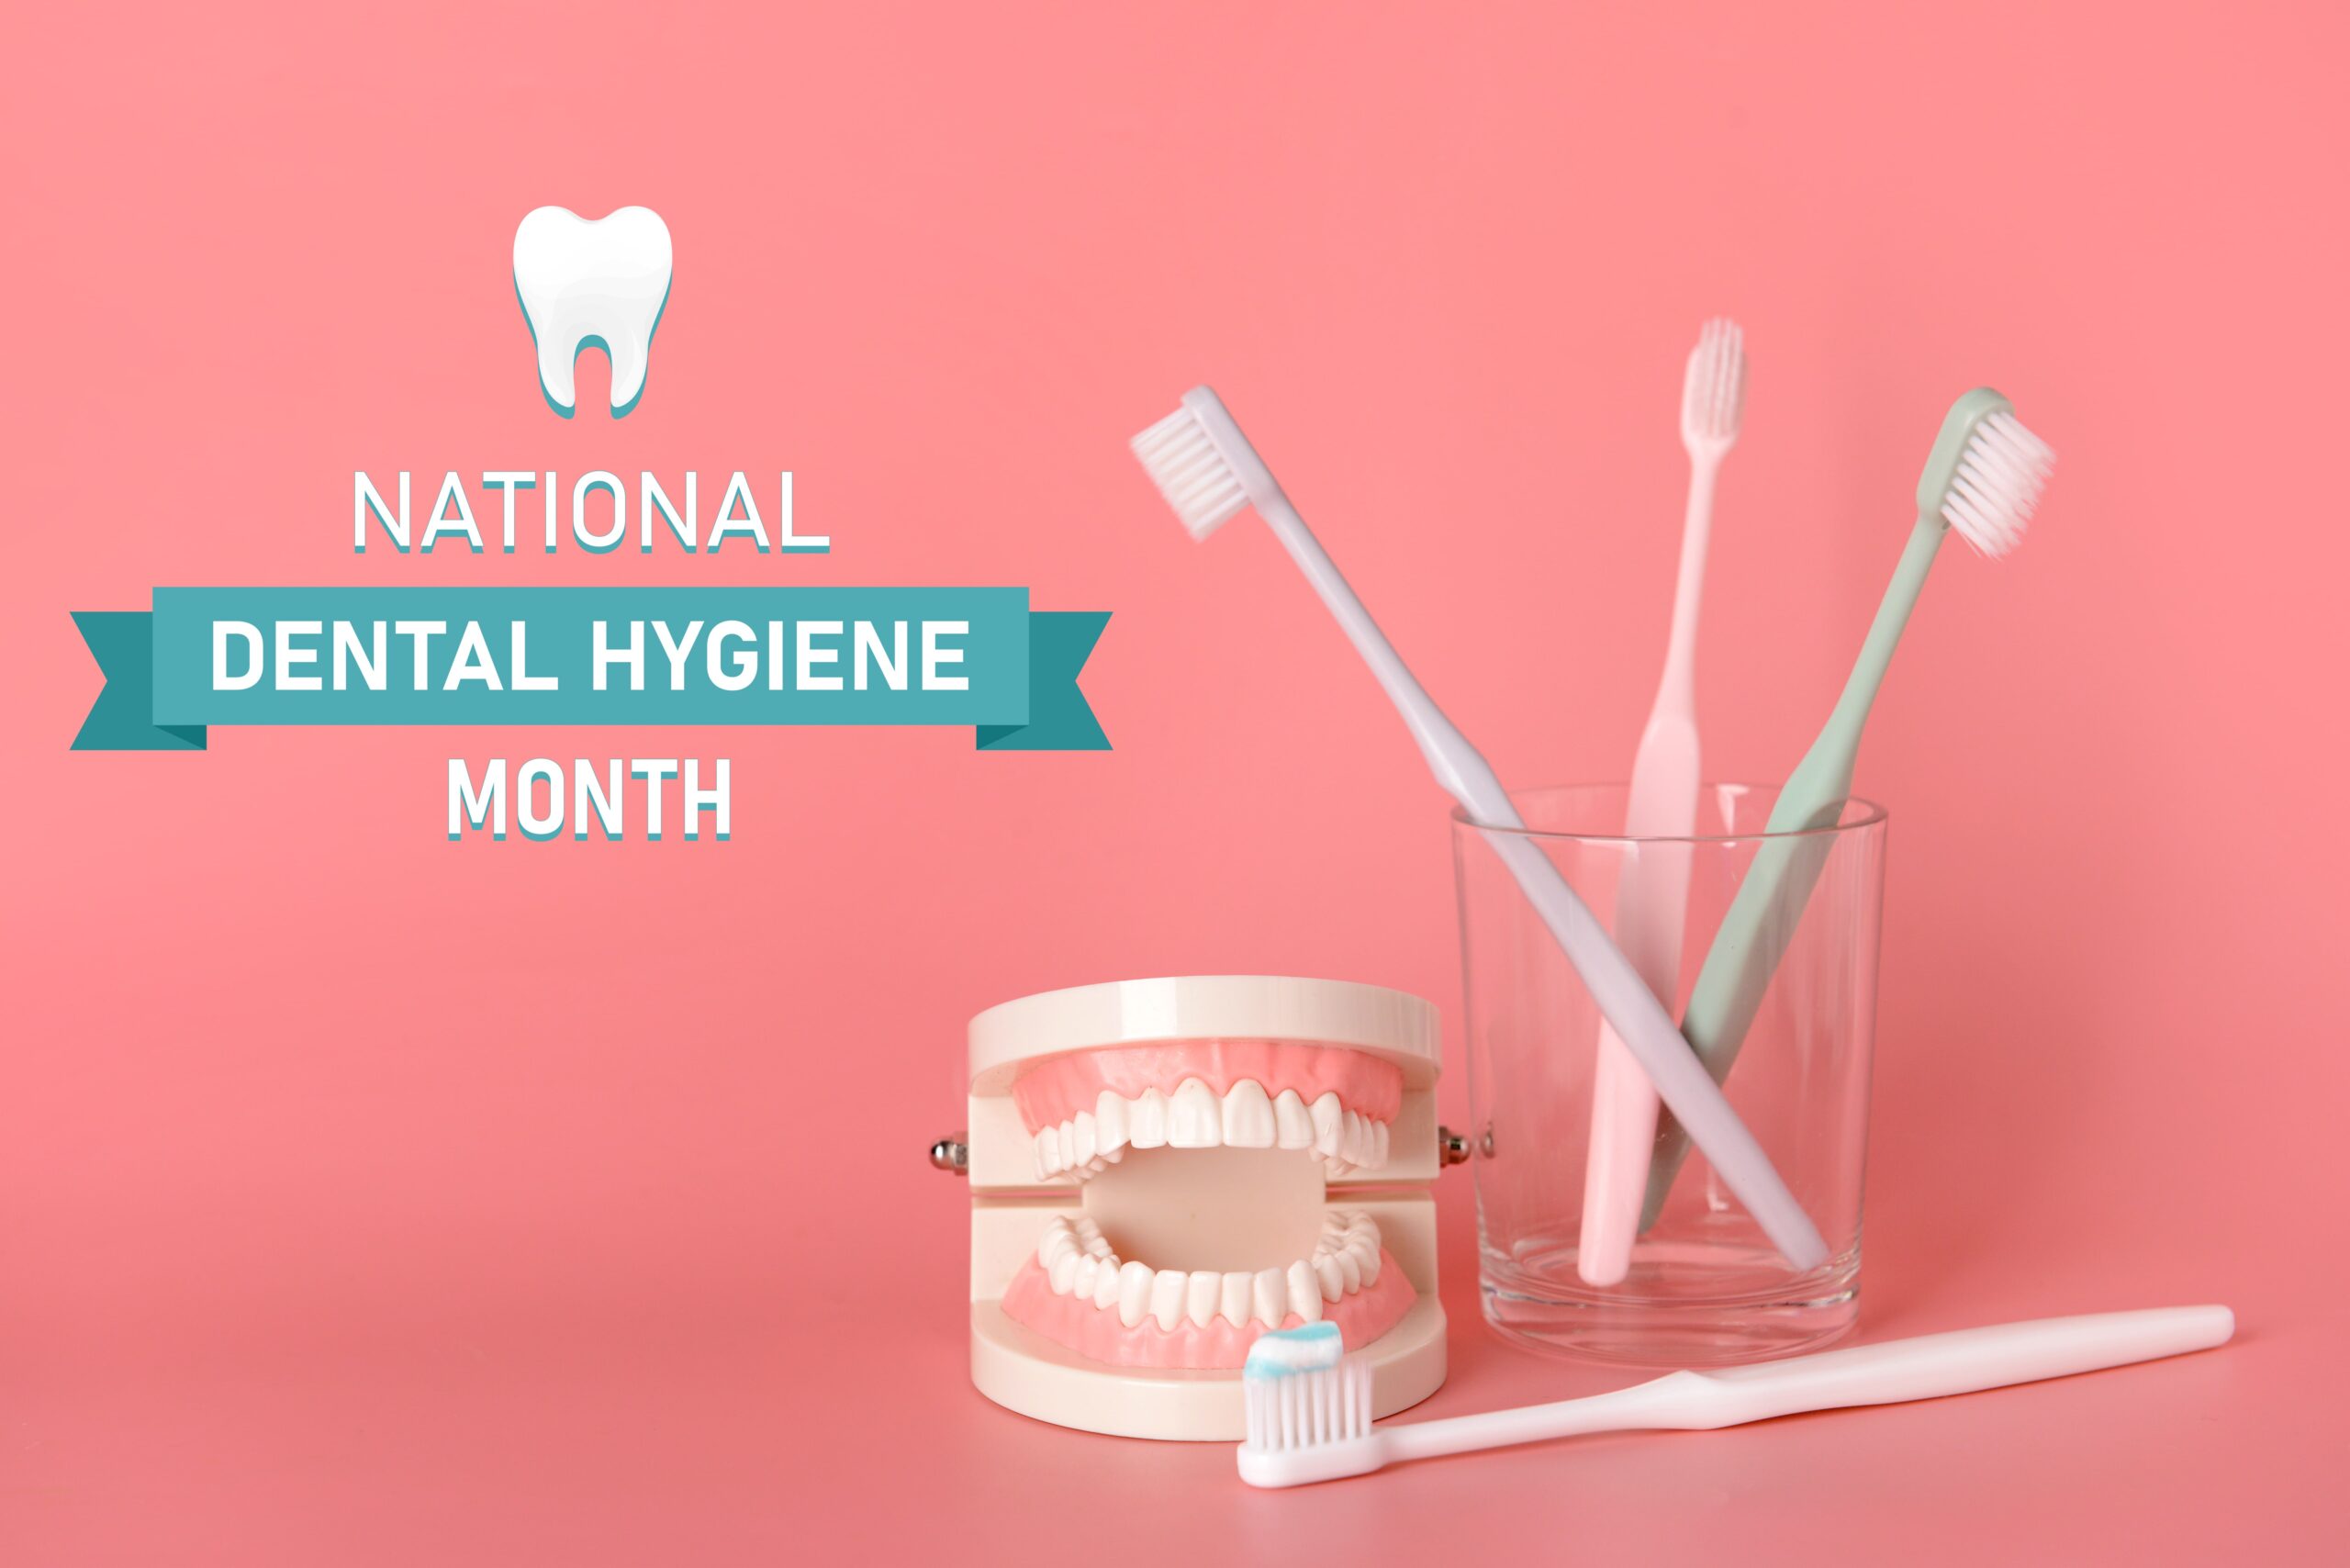 national dental hygiene month represented by teeth and toothbrushes